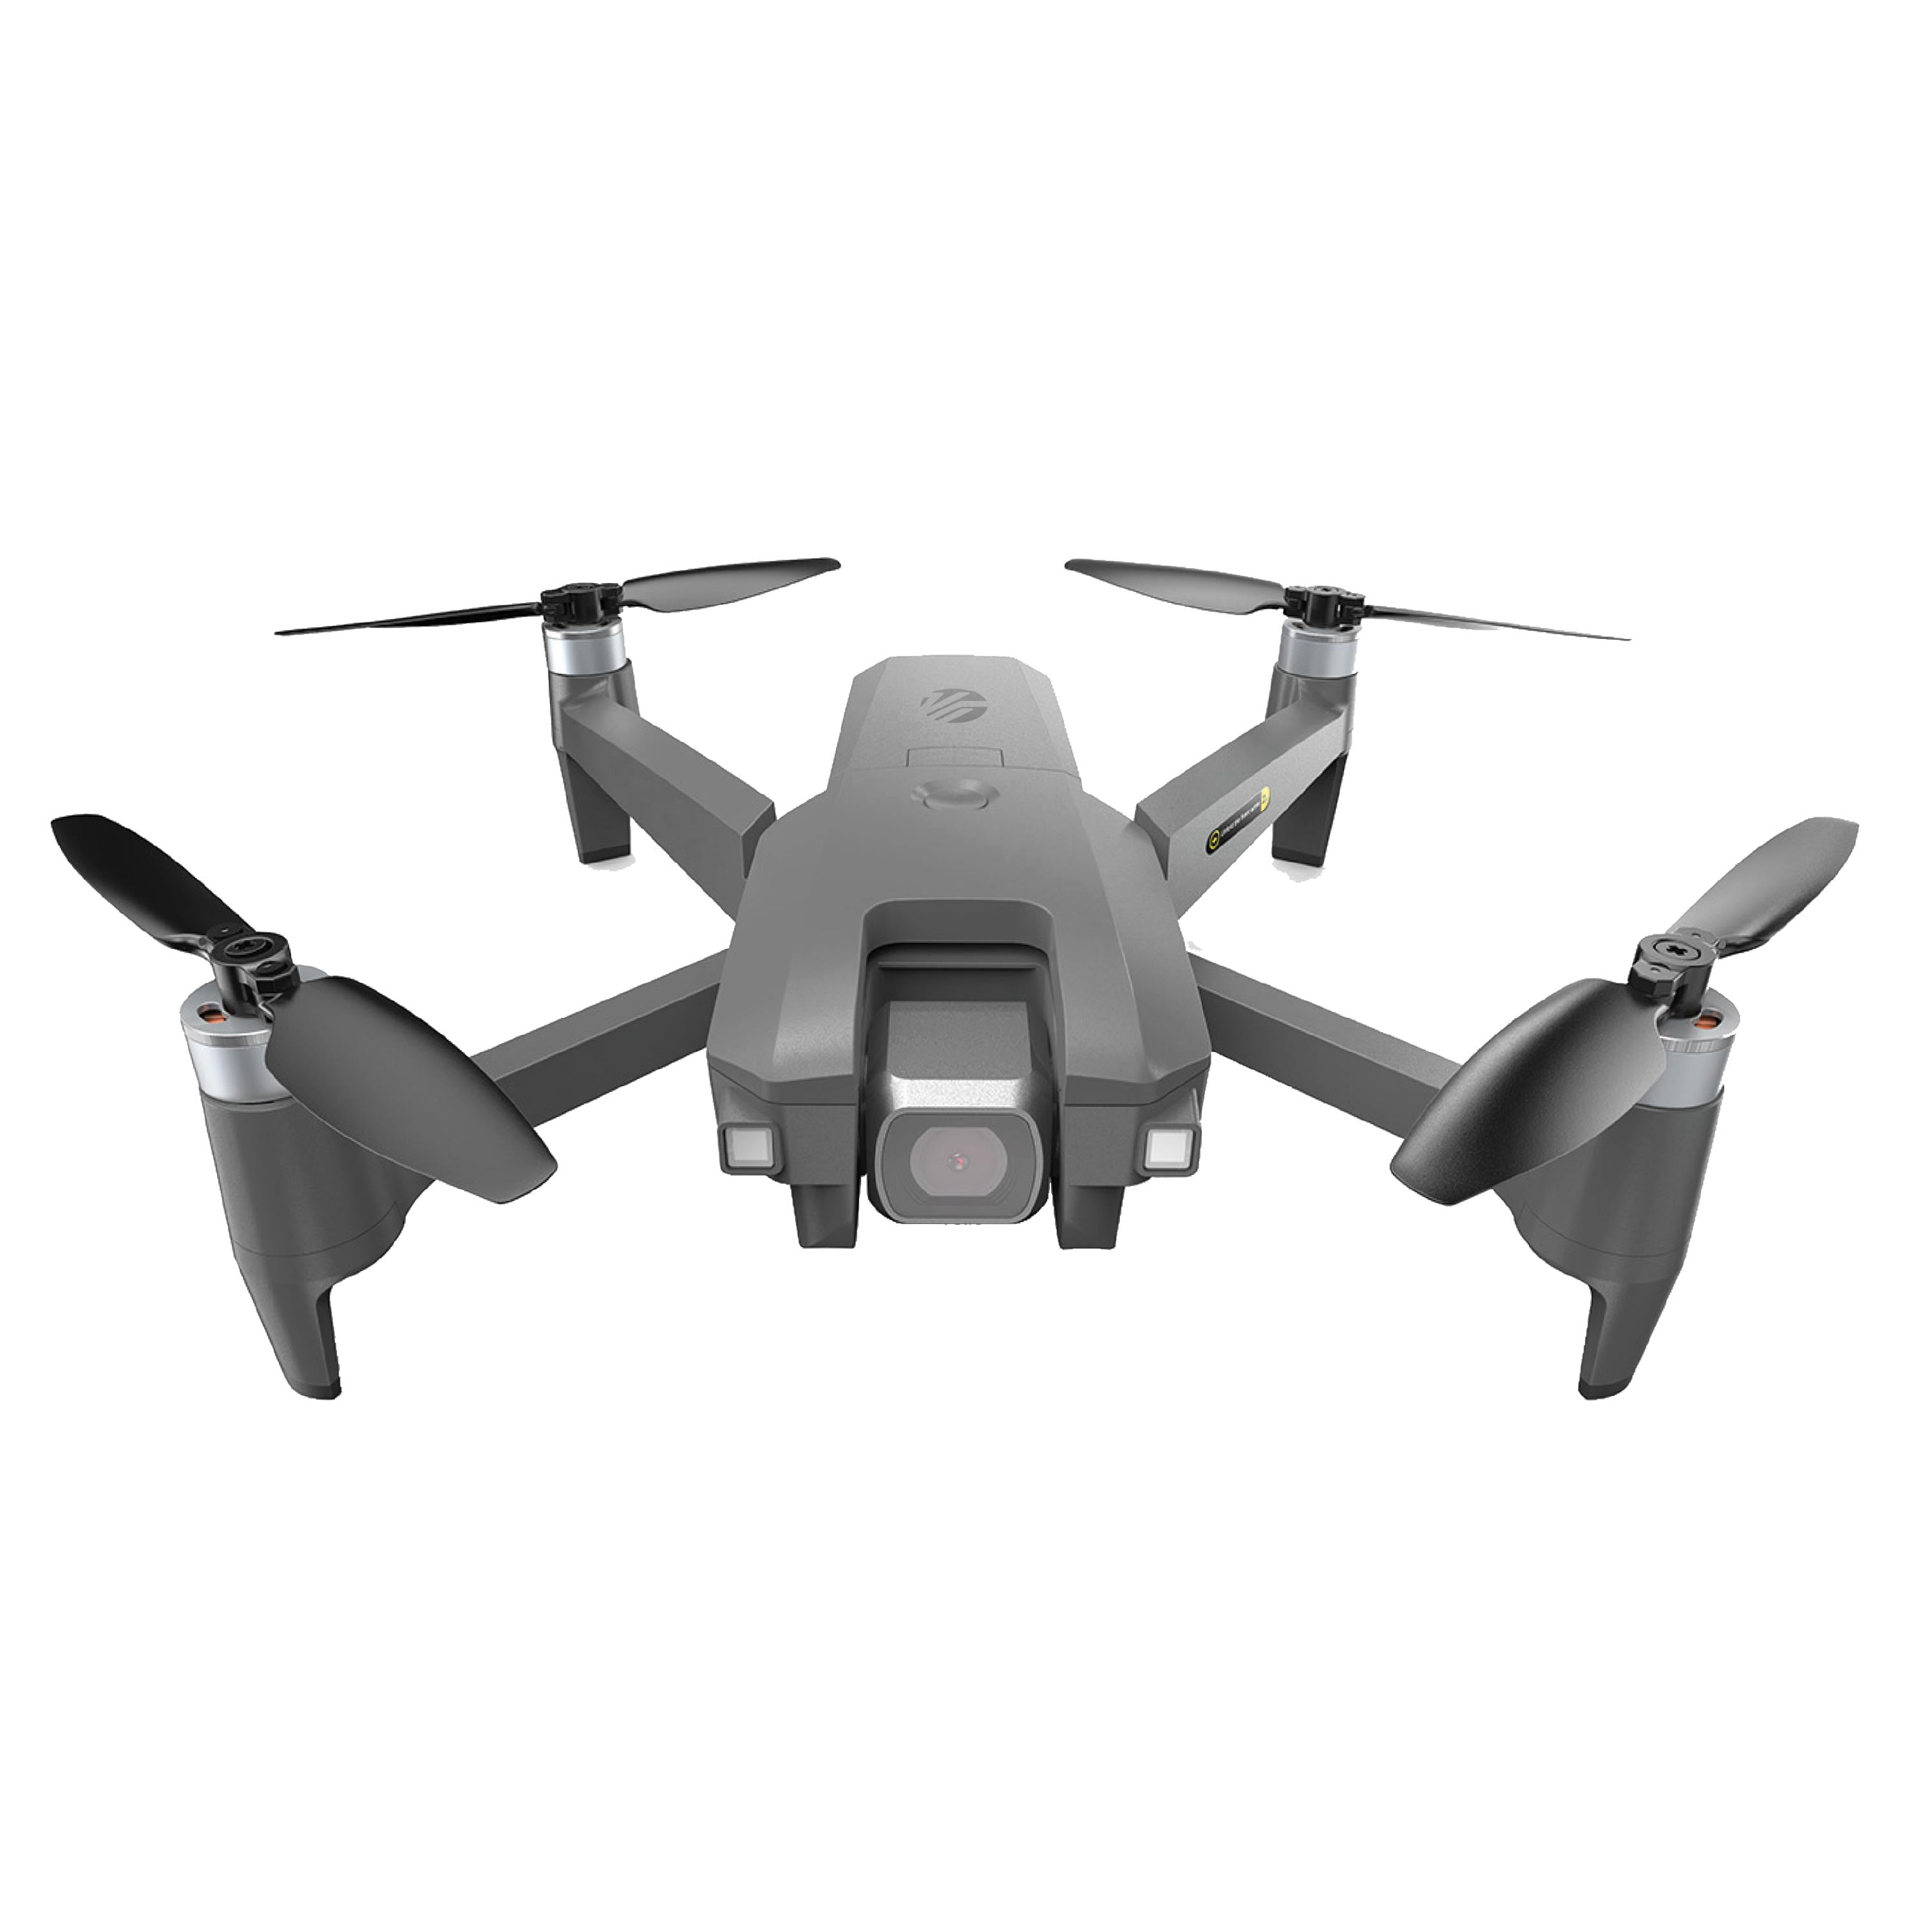 Foldable GPS Drone with Camera & Case